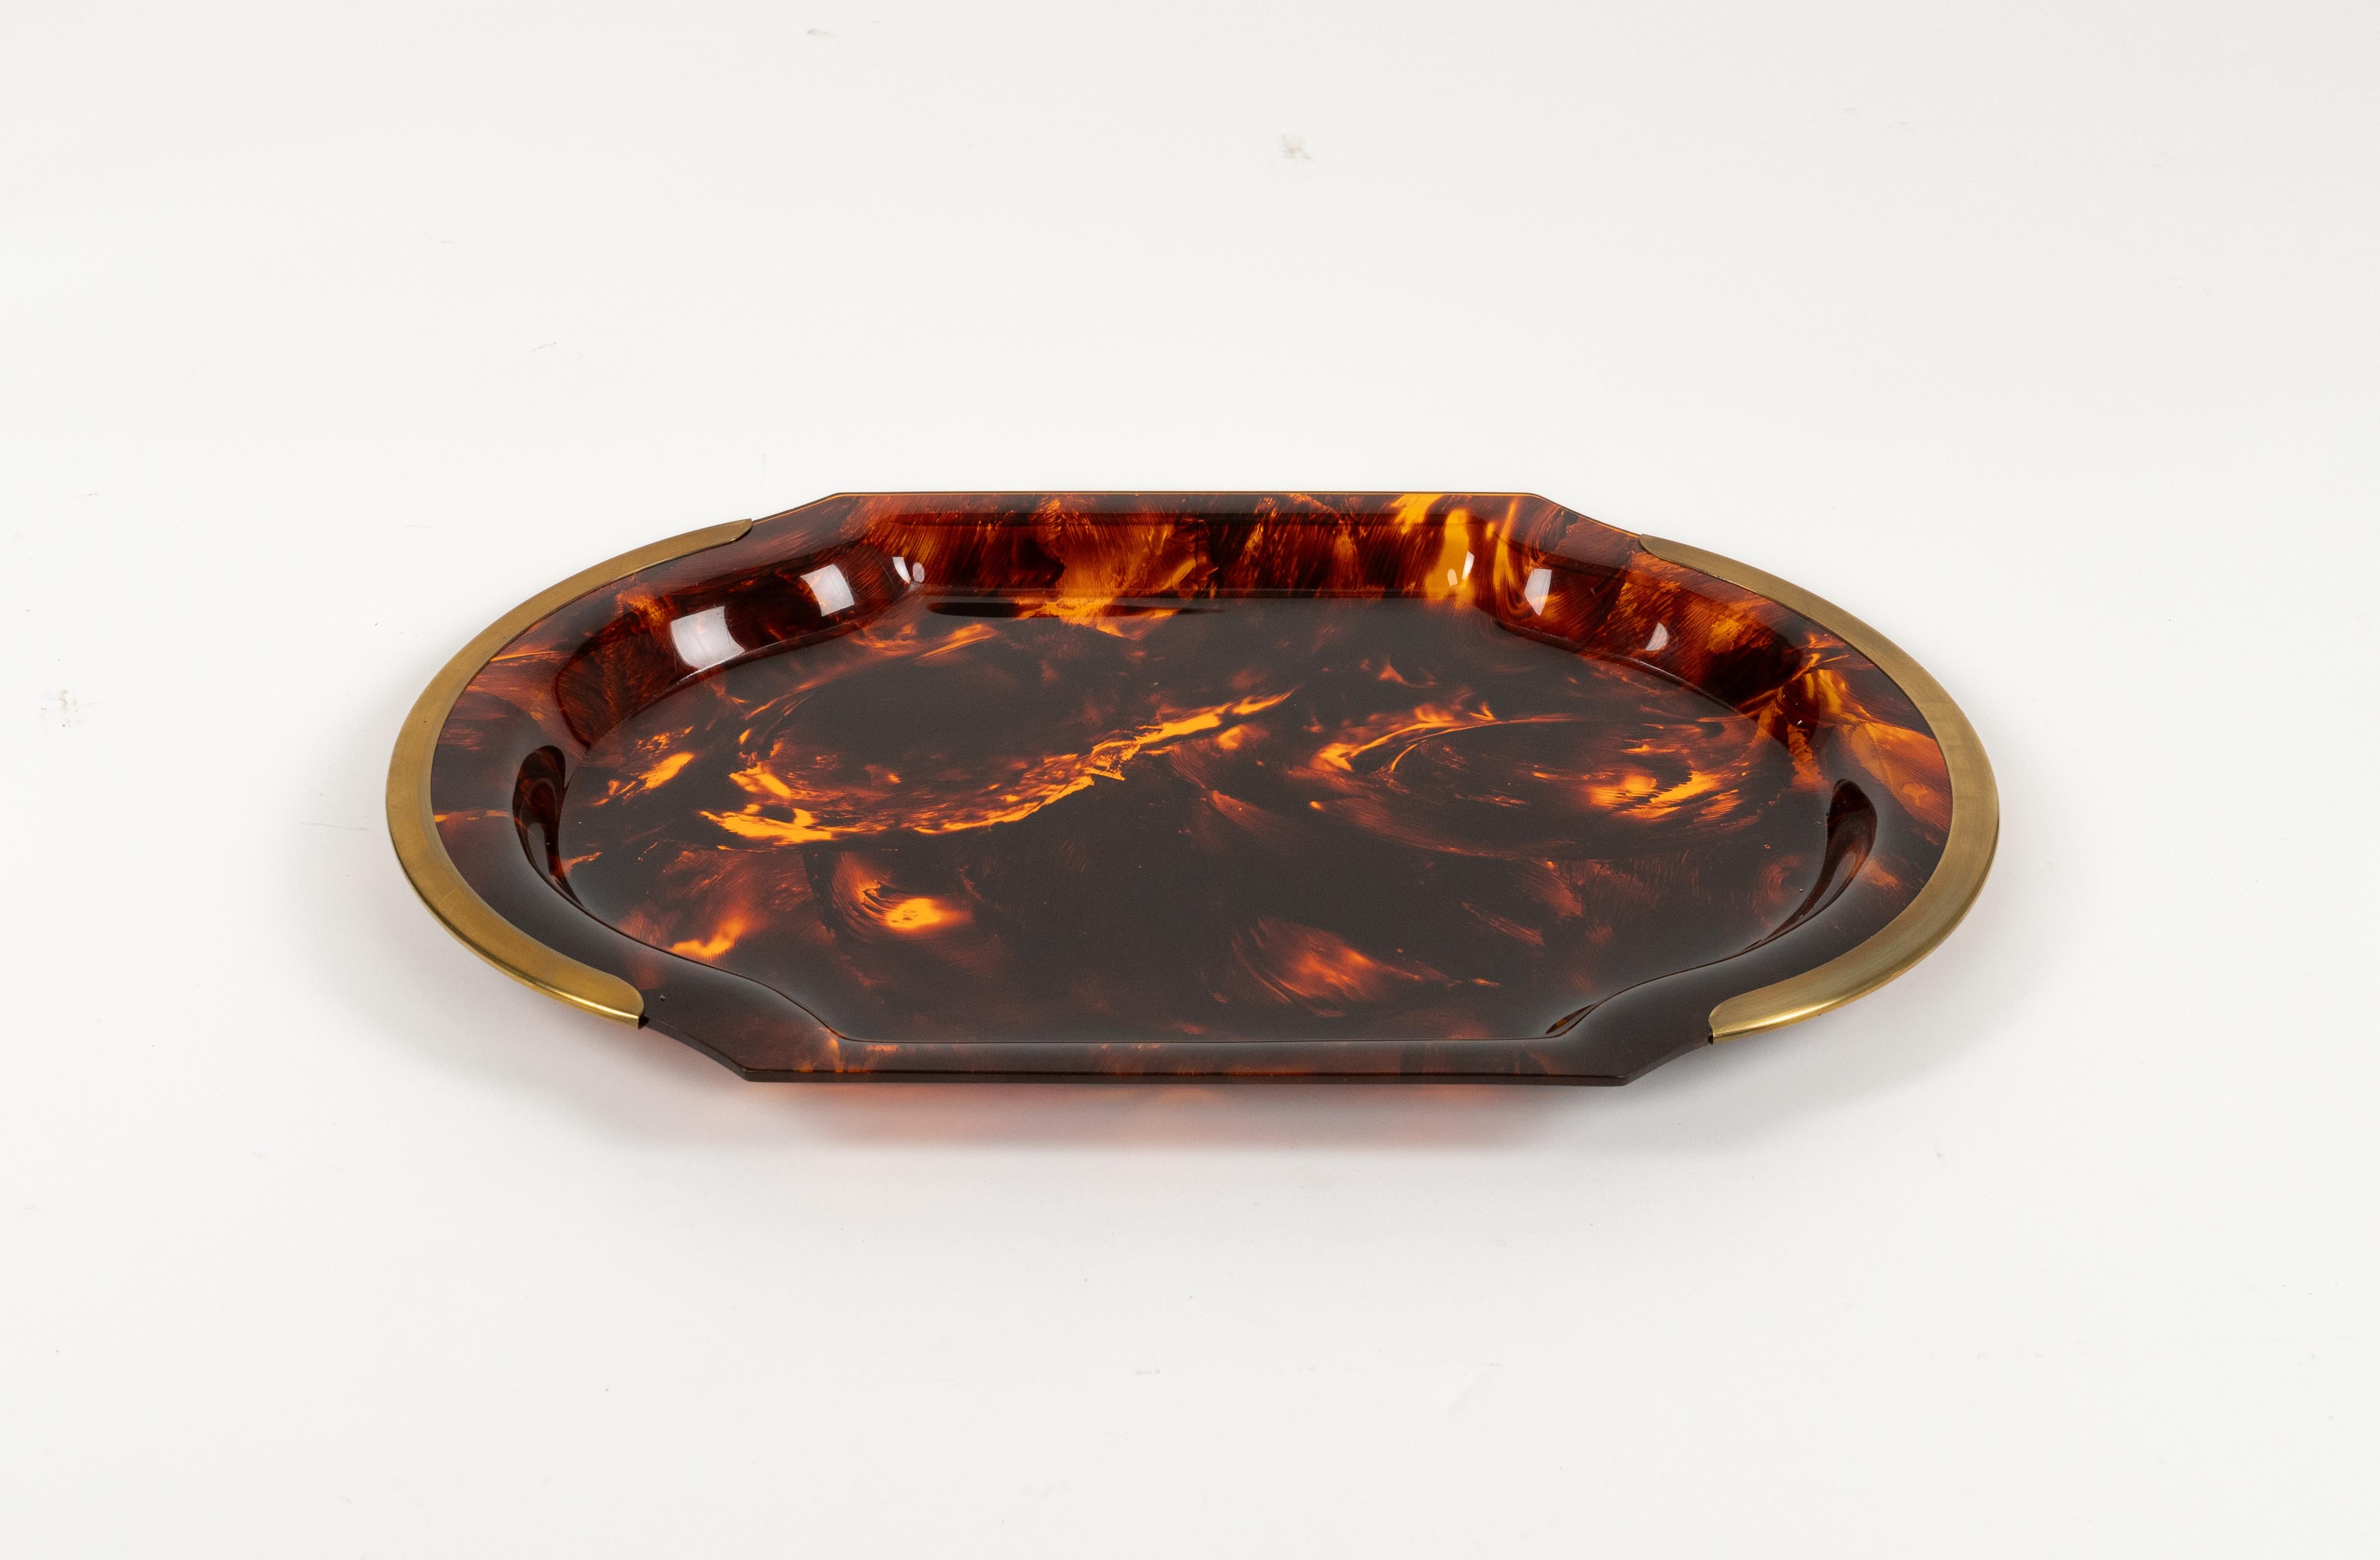 Midcentury amazing oval serving tray in faux tortoiseshell-effect Lucite featuring brass handles attributed to Team Guzzini.

Made in Italy in the 1970s.   

It's an iconic tray or plate made of lucite that will wow your guests and is perfect for a